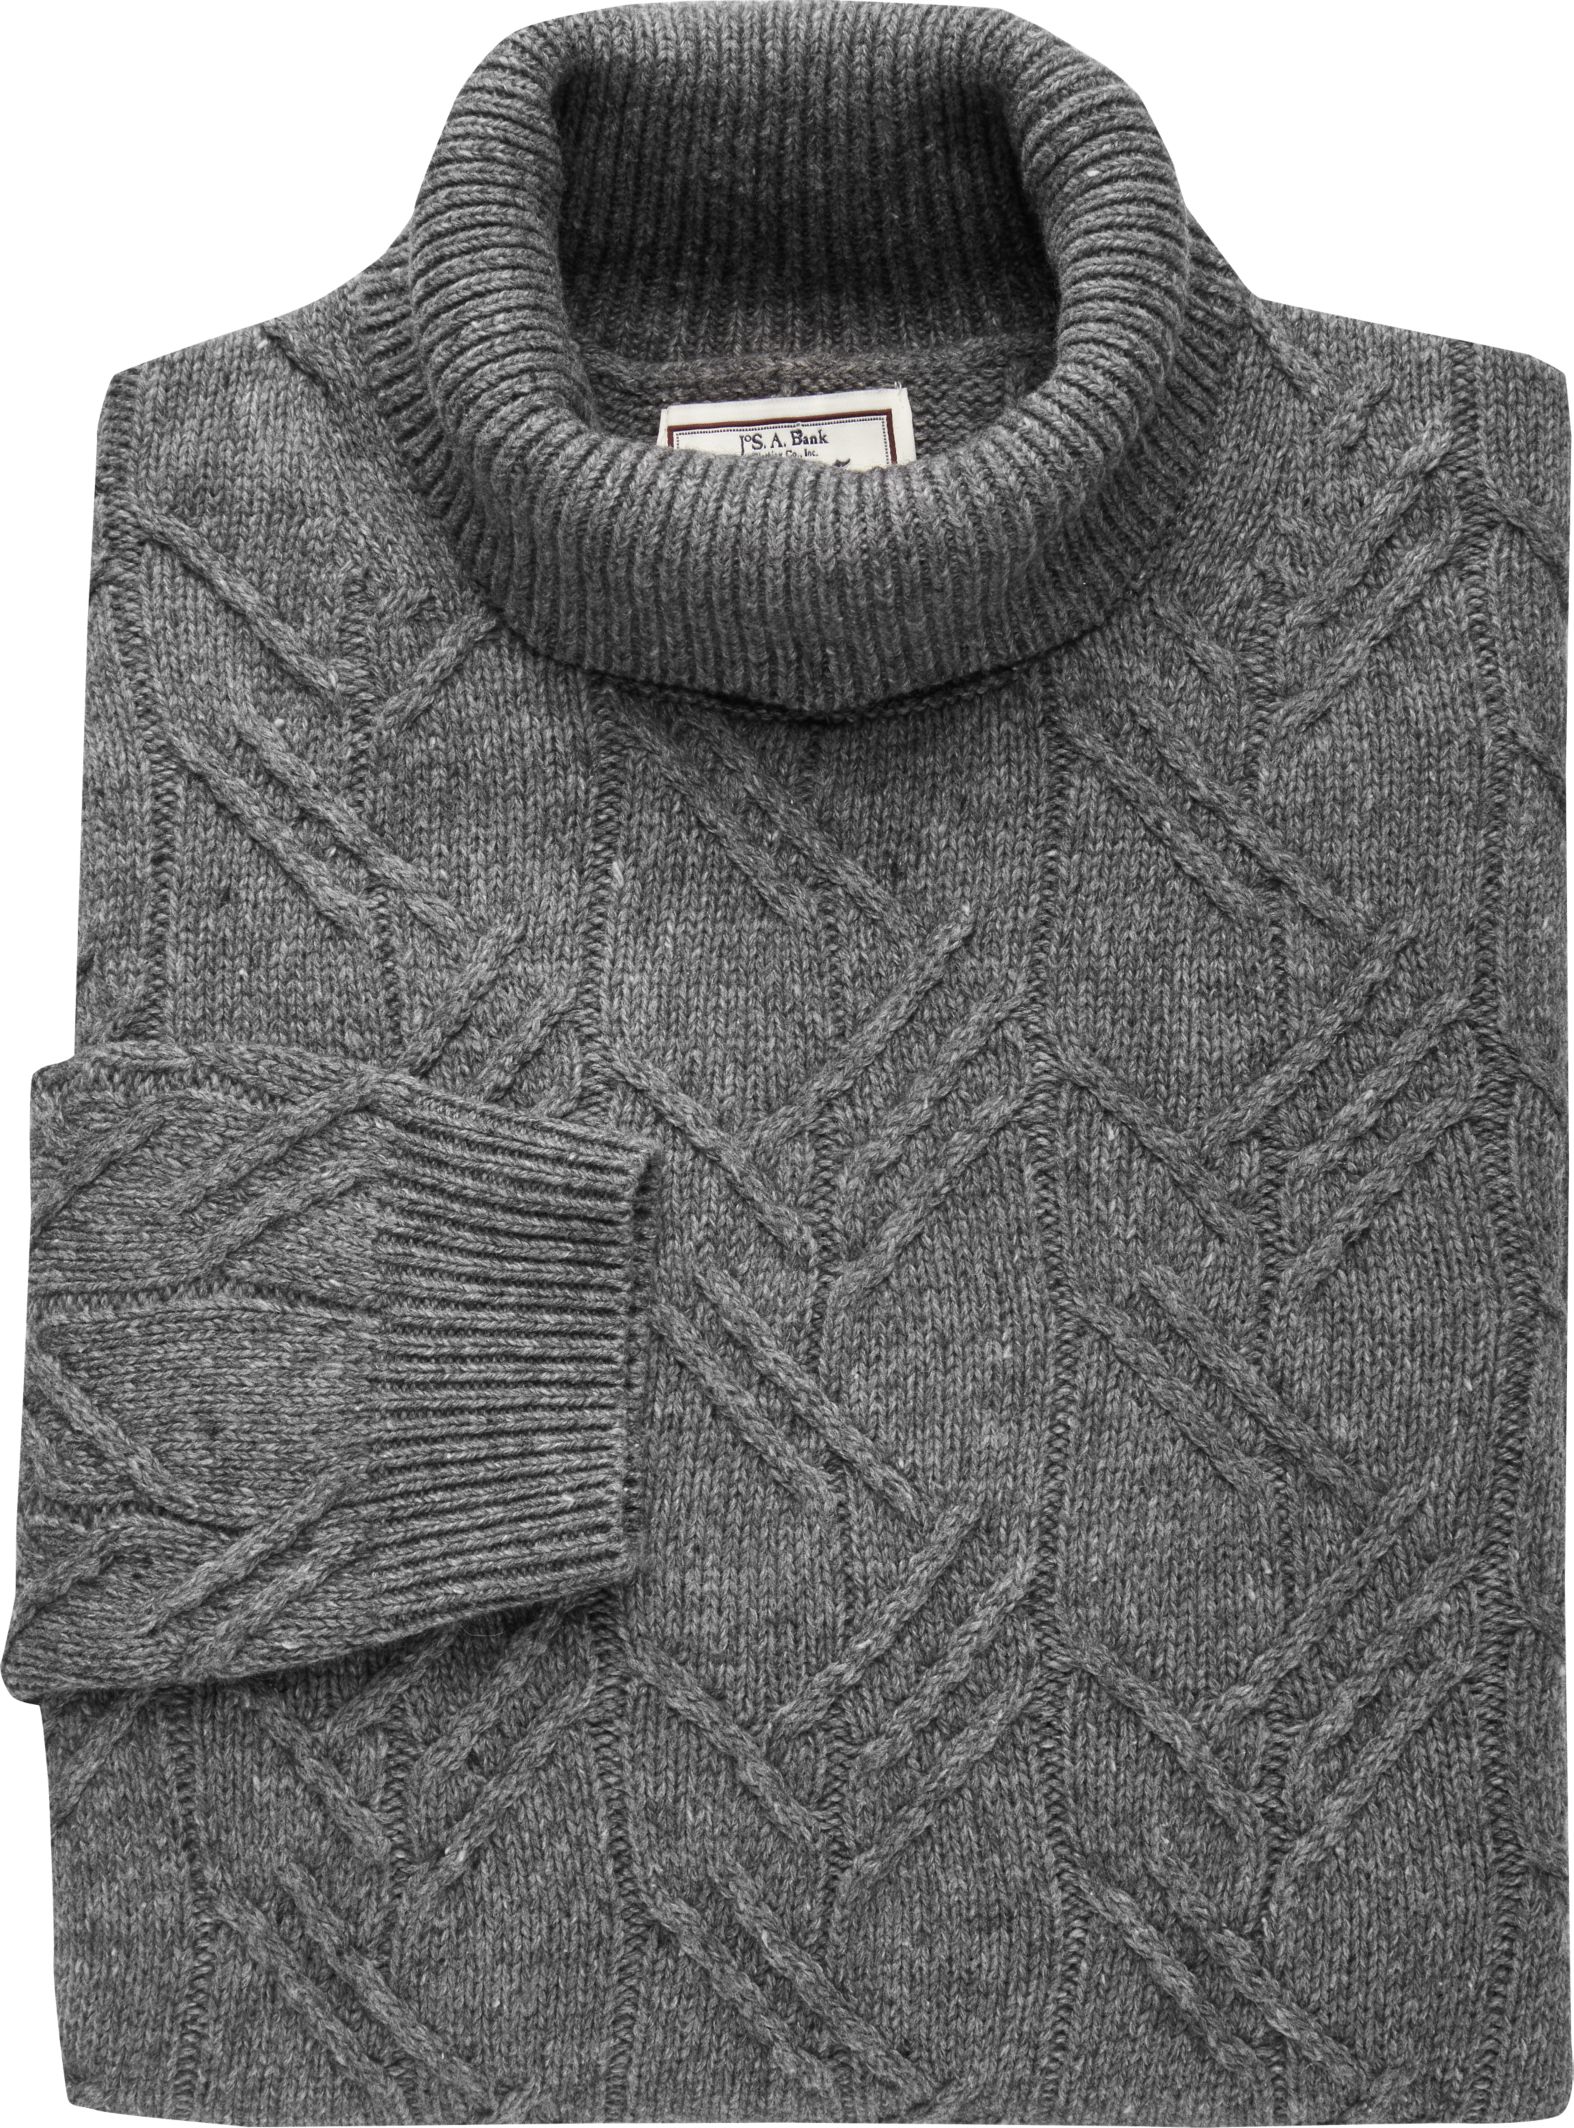 1905 Collection Turtleneck Cotton-Blend Sweater - Big & Tall CLEARANCE ...